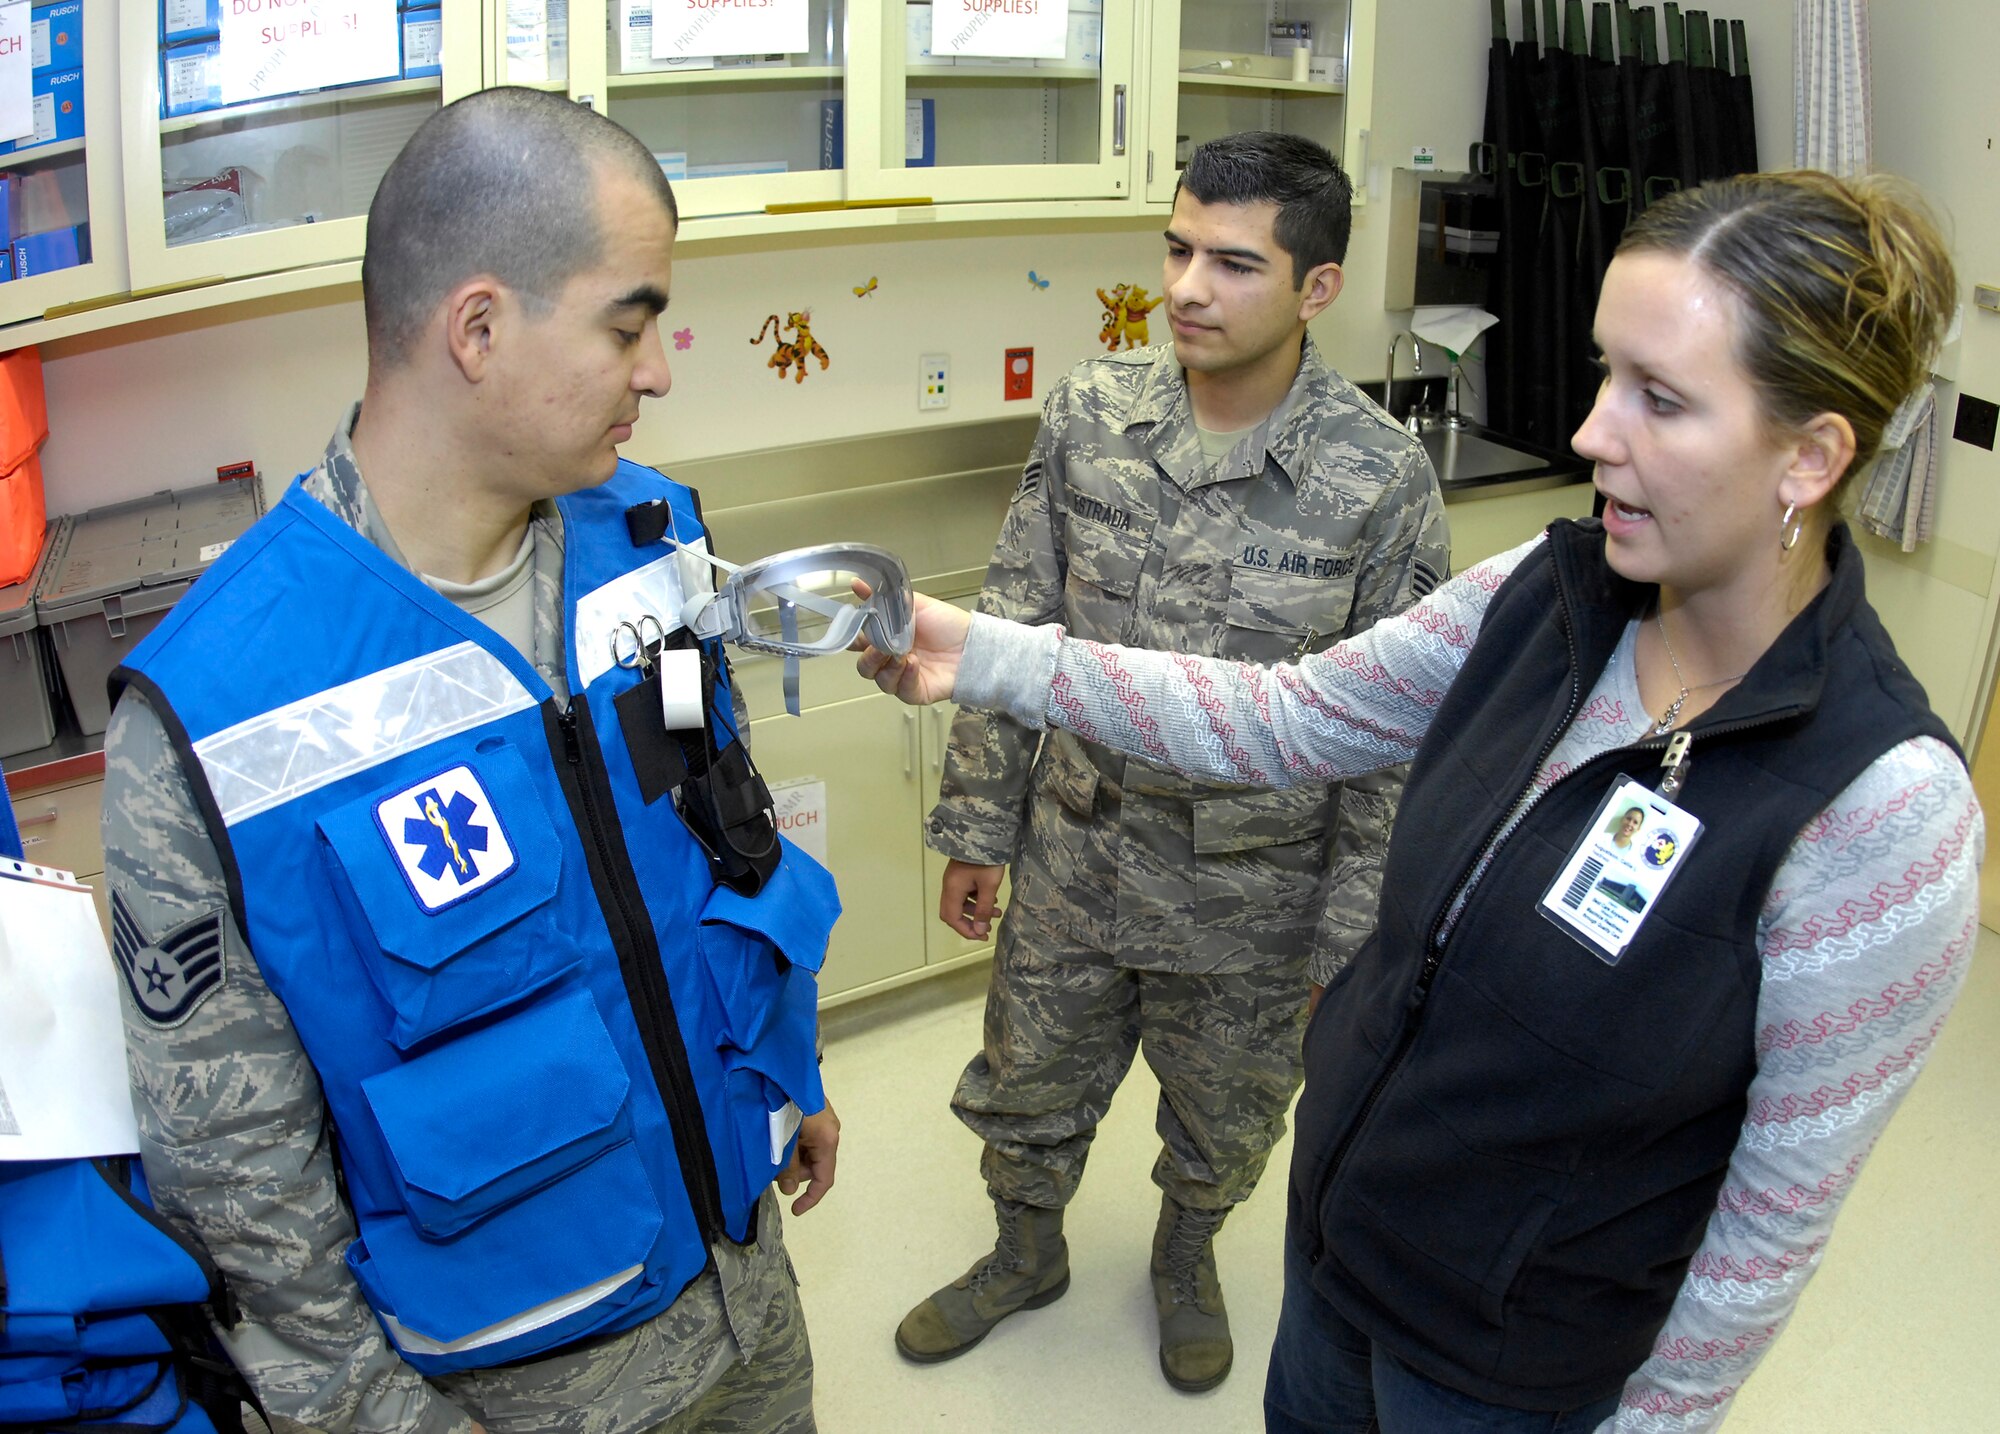 MINOT AIR FORCE BASE, N.D. -- Callie Augustson, 5th Medical Support Squadron medical readiness planner and analyst, shows Staff Sgt. Jesus Olivares, 5th Medical Support Squadron medical readiness noncommissioned officer-in-charge, and Senior Airman Eric Estrada, 5th MDSS medical readiness technician, the key facets of a quick response vest during a training exercise to ensure they are ready to ensure Minot Airmen are safe Nov. 5 here. The medical readiness flight ensures 5th Medical Group Airmen are ready to deploy in support of their countries interests around the world. The 5th MDG recently underwent a Health Services Inspection that covered 16 areas in four major categories. The group received an overall rating of excellent with eight of the graded areas receiving an outstanding, the highest rating possible. (U.S. Air Force photo by Airman 1st Class Benjamin Stratton)